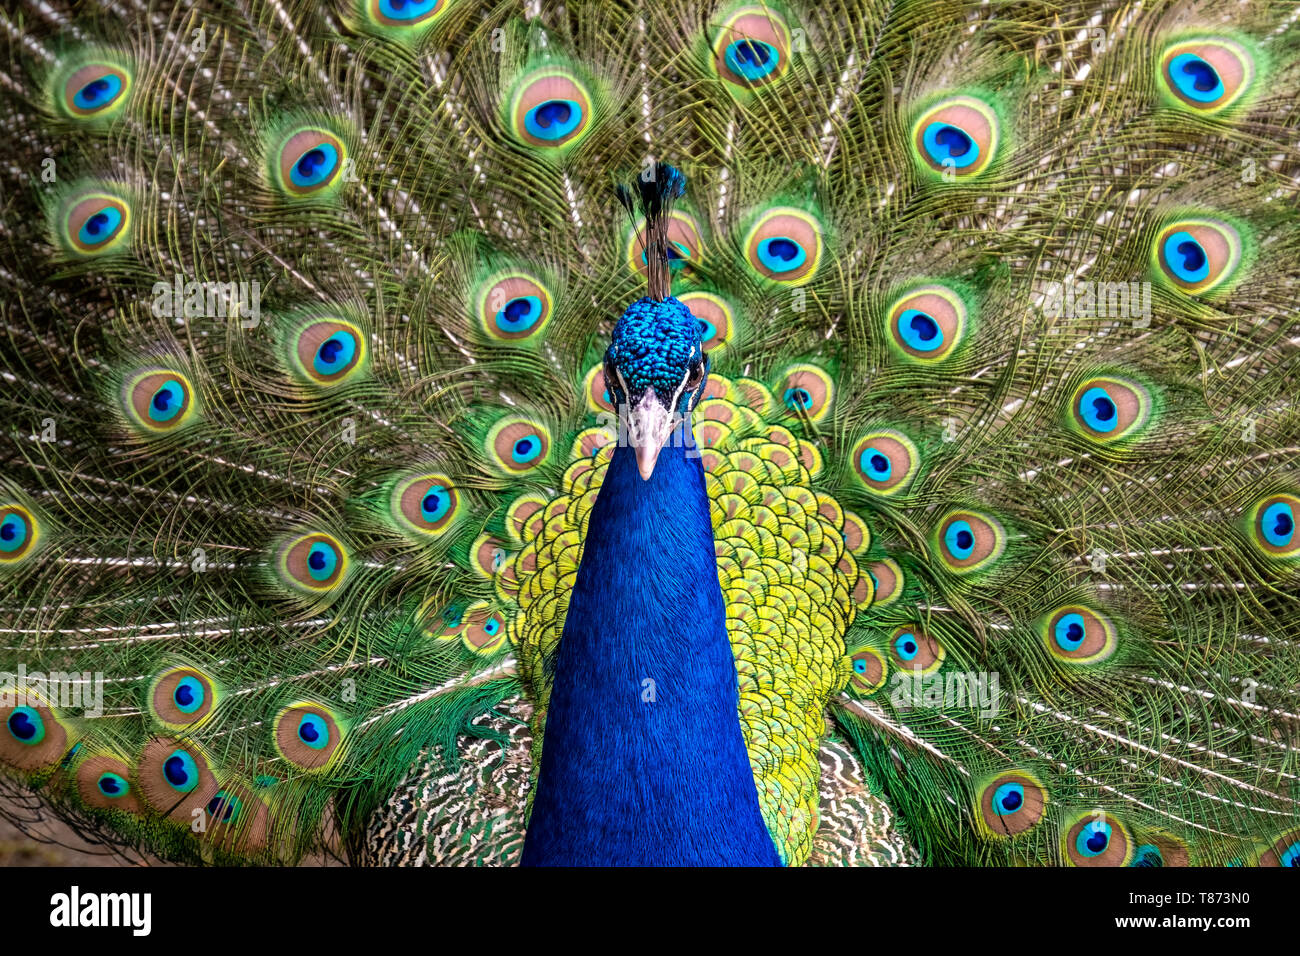 Male blue peacock (pavo cristatus) displaying with its tail feathured Stock Photo